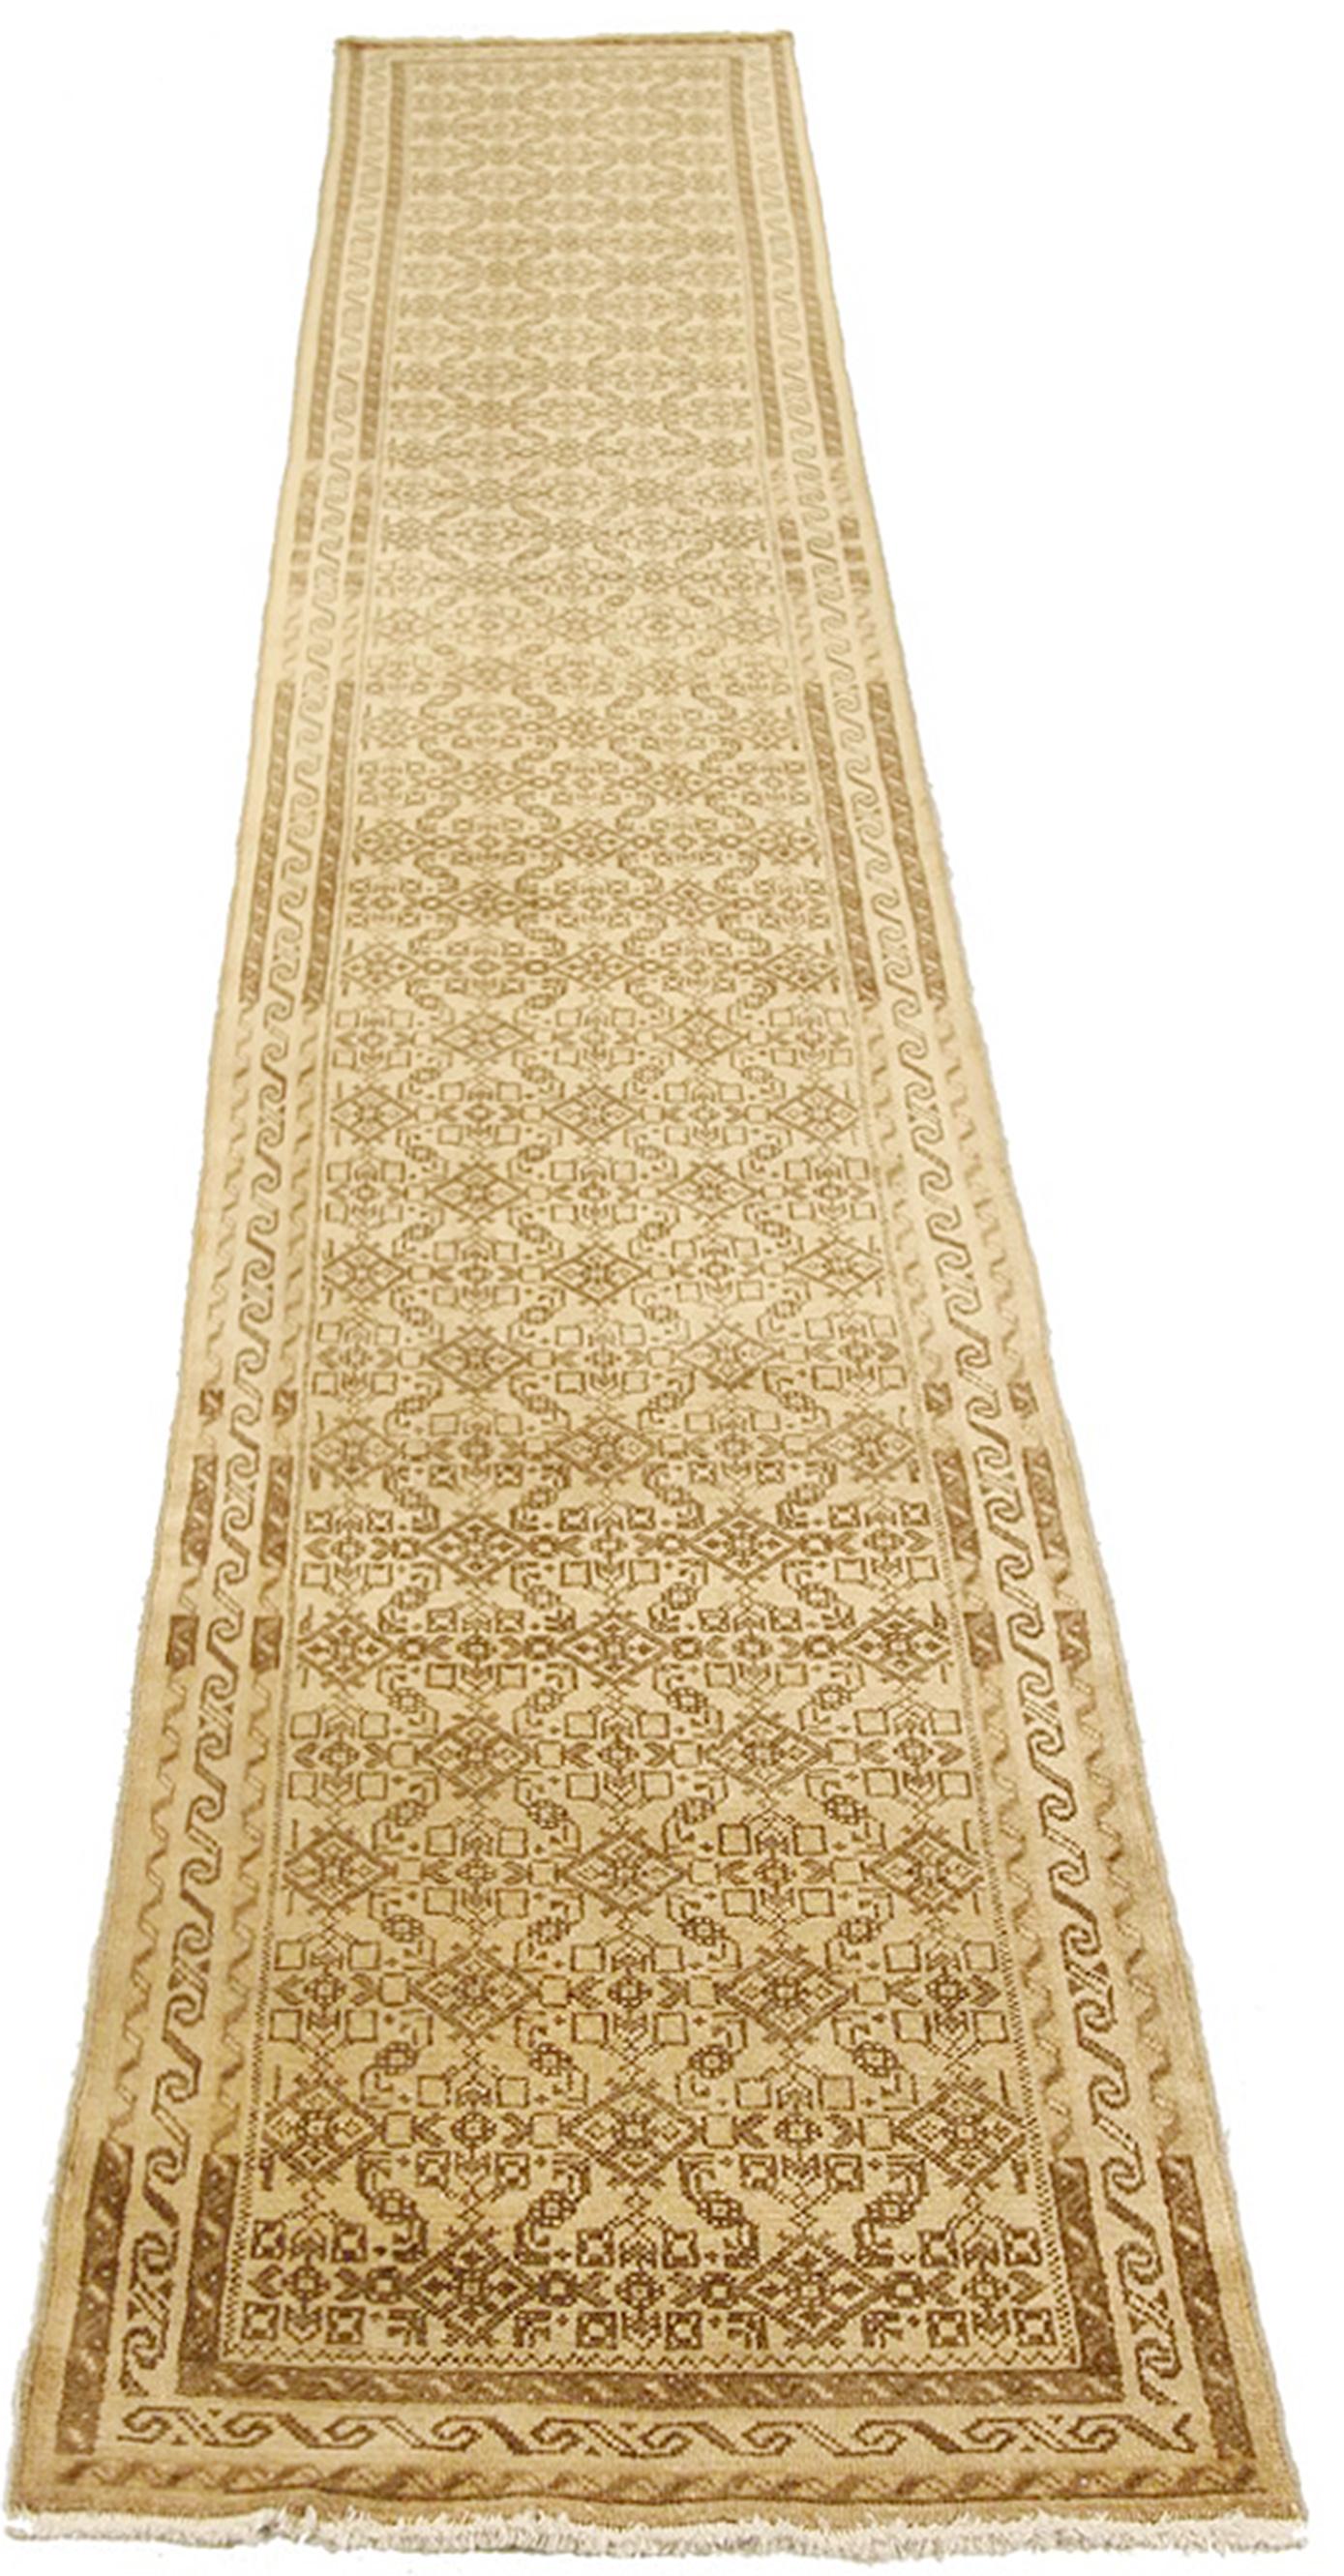 Antique Persian rug handwoven from the finest sheep’s wool and colored with all-natural vegetable dyes that are safe for humans and pets. It’s a traditional Malayer design featuring brown geometric details over a beige field. It’s a lovely piece to